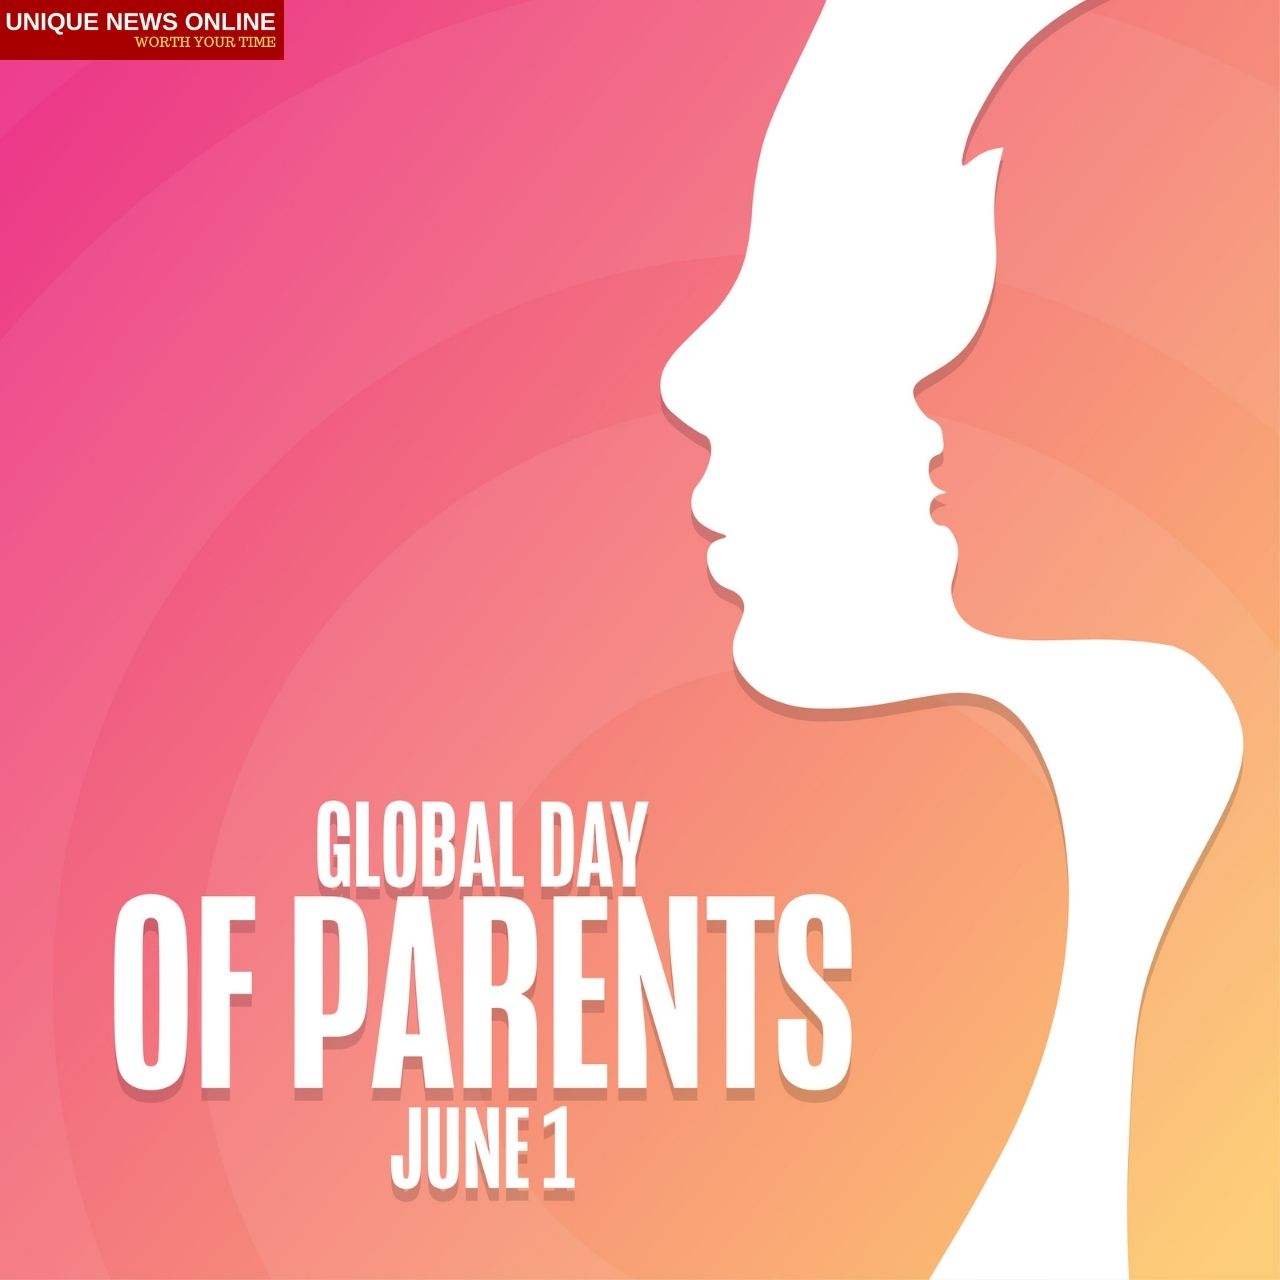 Global Day of Parents 2021: Theme, Quotes, Slogans, Wishes, and Images.